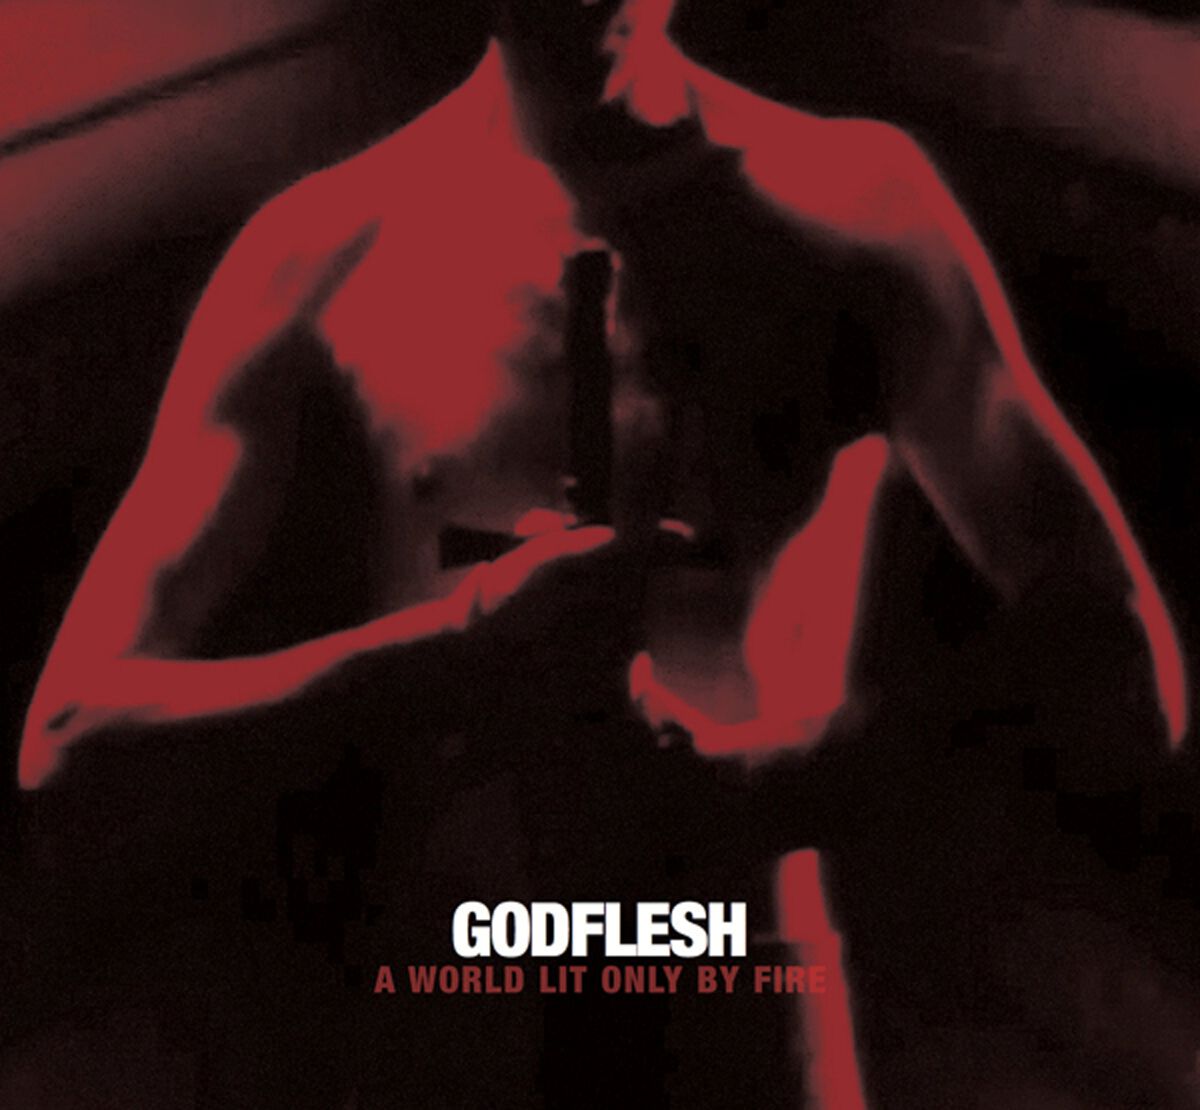 A world lit only by fire von Godflesh - LP (Coloured, Limited Edition, Re-Release, Standard)